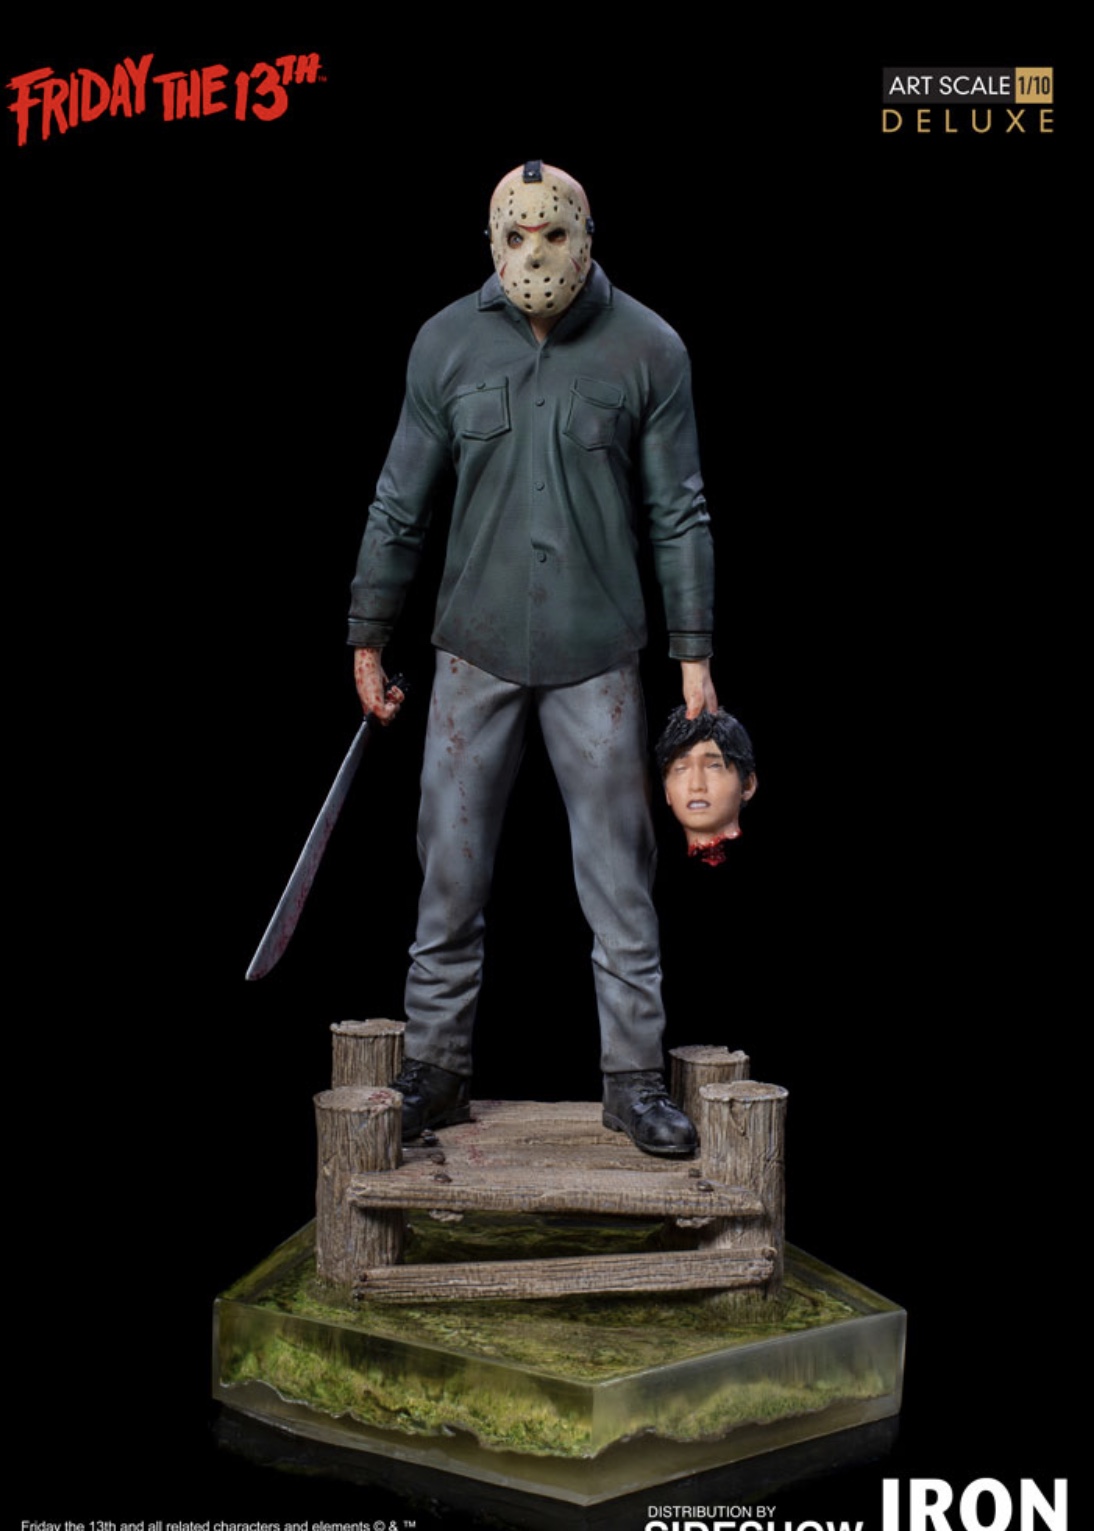 Jason Deluxe Statue by Iron Studios Art Scale 1:10